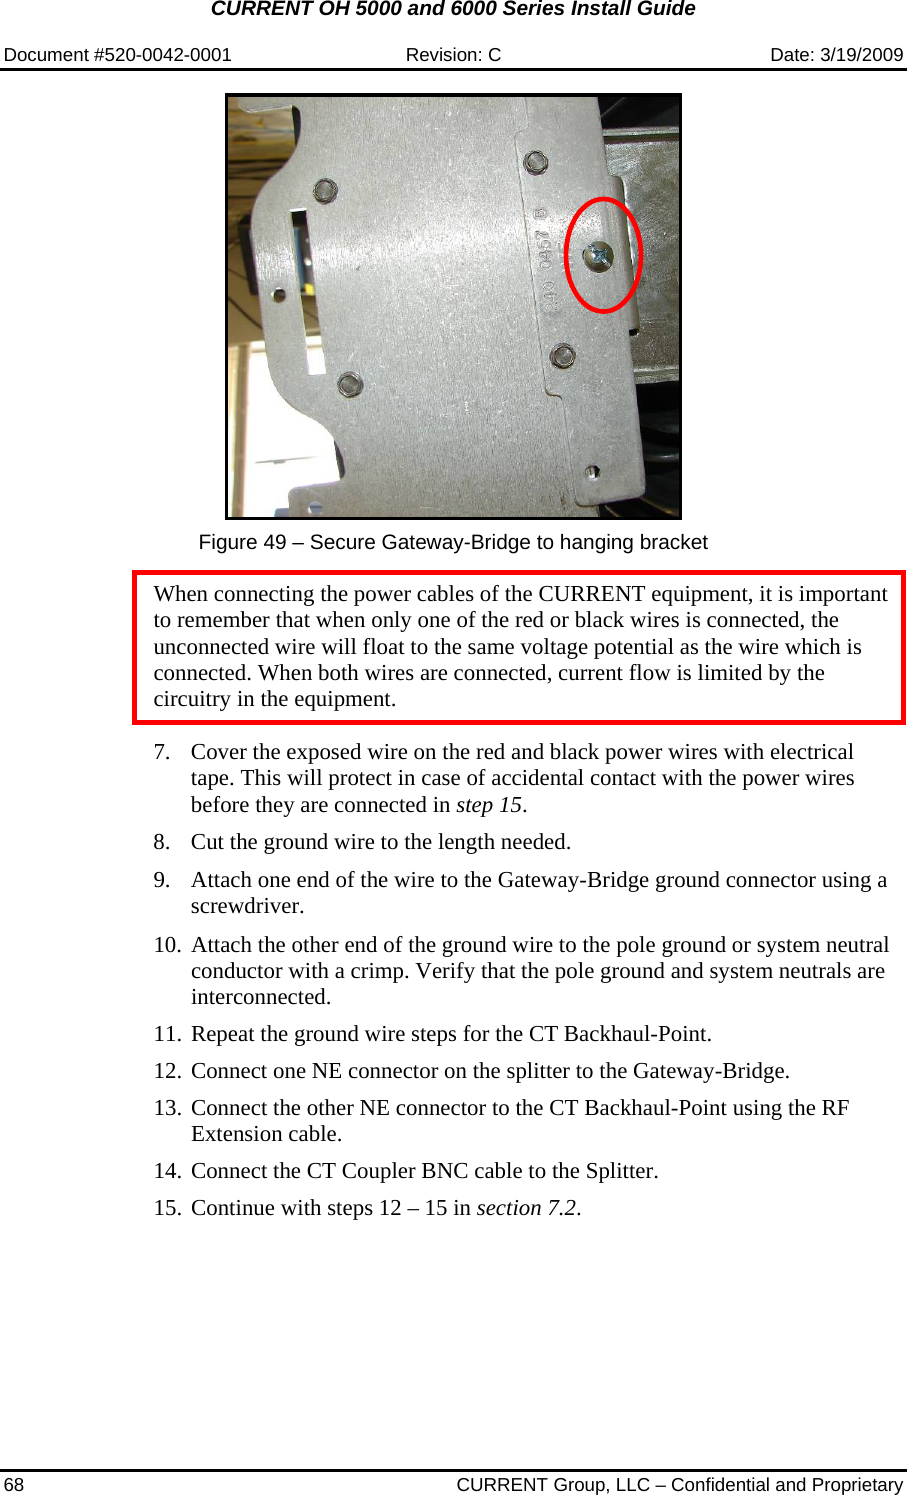 CURRENT OH 5000 and 6000 Series Install Guide  Document #520-0042-0001  Revision: C  Date: 3/19/2009 68  CURRENT Group, LLC – Confidential and Proprietary   Figure 49 – Secure Gateway-Bridge to hanging bracket  When connecting the power cables of the CURRENT equipment, it is important to remember that when only one of the red or black wires is connected, the unconnected wire will float to the same voltage potential as the wire which is connected. When both wires are connected, current flow is limited by the circuitry in the equipment.  7. Cover the exposed wire on the red and black power wires with electrical tape. This will protect in case of accidental contact with the power wires before they are connected in step 15. 8. Cut the ground wire to the length needed.  9. Attach one end of the wire to the Gateway-Bridge ground connector using a screwdriver.   10. Attach the other end of the ground wire to the pole ground or system neutral conductor with a crimp. Verify that the pole ground and system neutrals are interconnected. 11. Repeat the ground wire steps for the CT Backhaul-Point. 12. Connect one NE connector on the splitter to the Gateway-Bridge. 13. Connect the other NE connector to the CT Backhaul-Point using the RF Extension cable. 14. Connect the CT Coupler BNC cable to the Splitter. 15. Continue with steps 12 – 15 in section 7.2. 